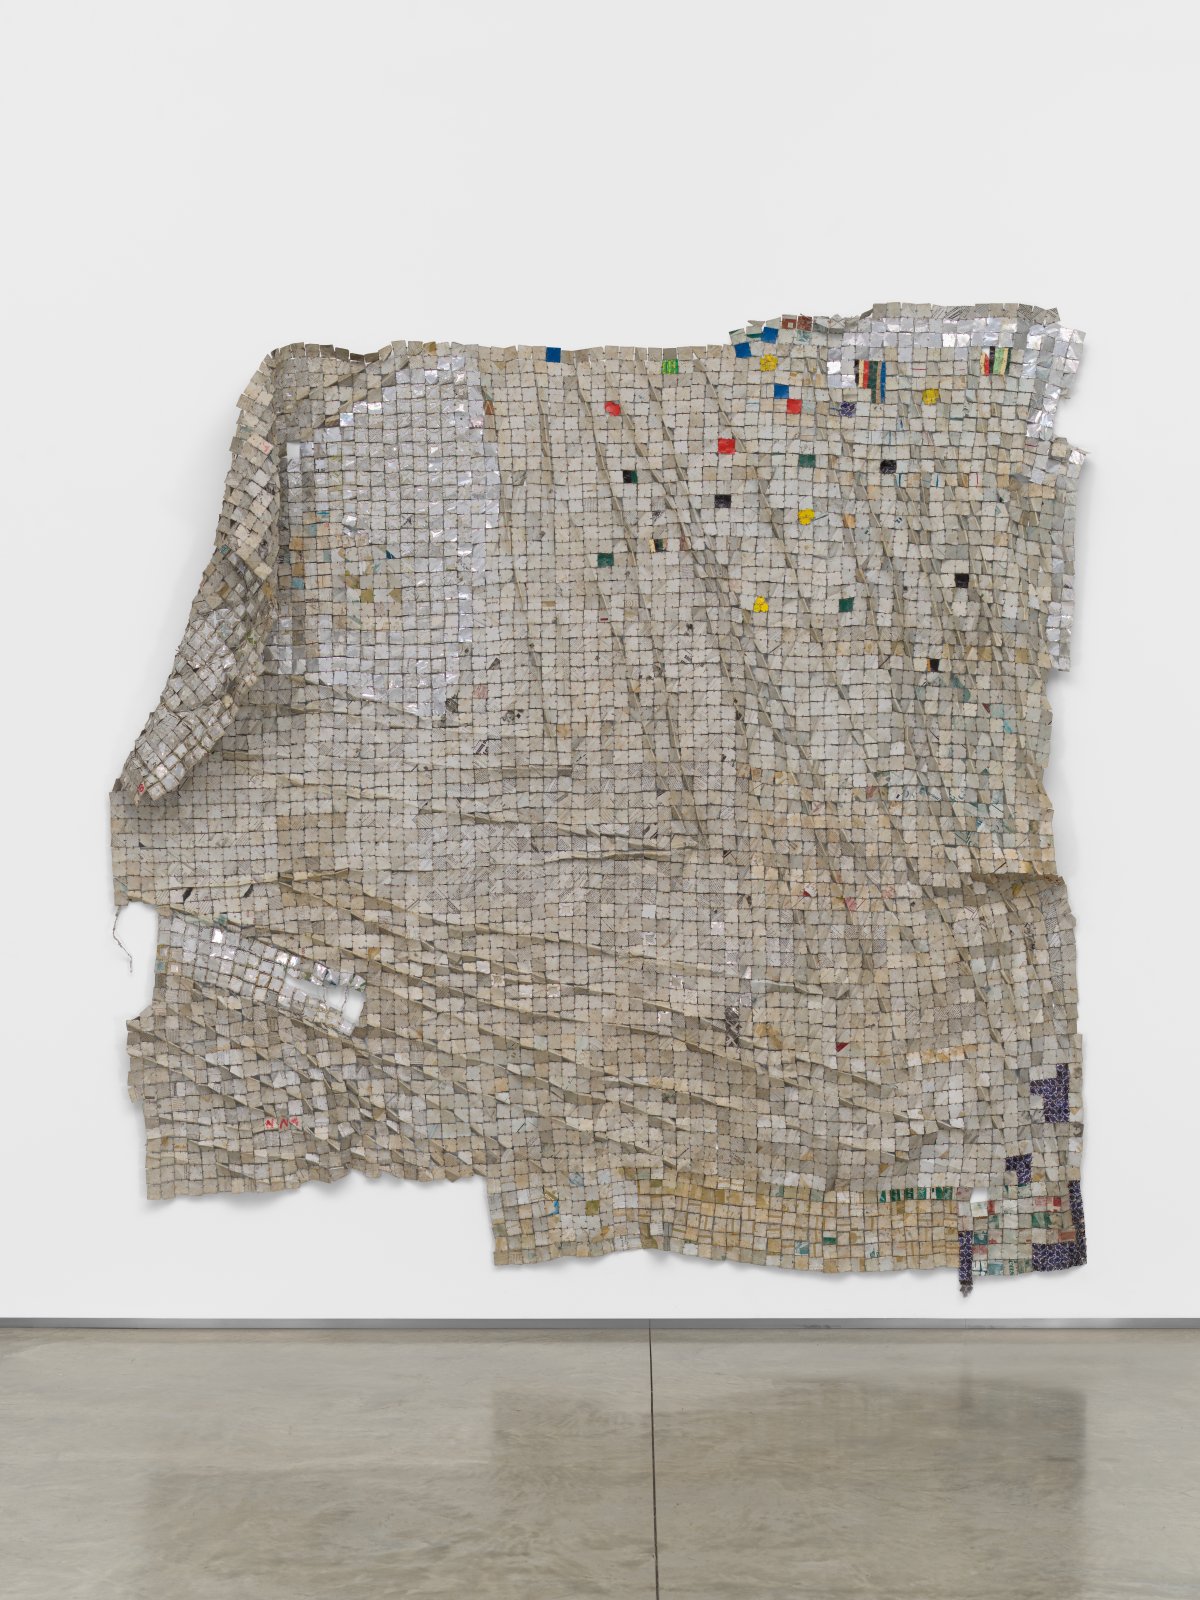 El Anatsui, Bloodshot Eyes Don’t Mean Seriousness, Clenched Teeth Don’t Either, 2023 